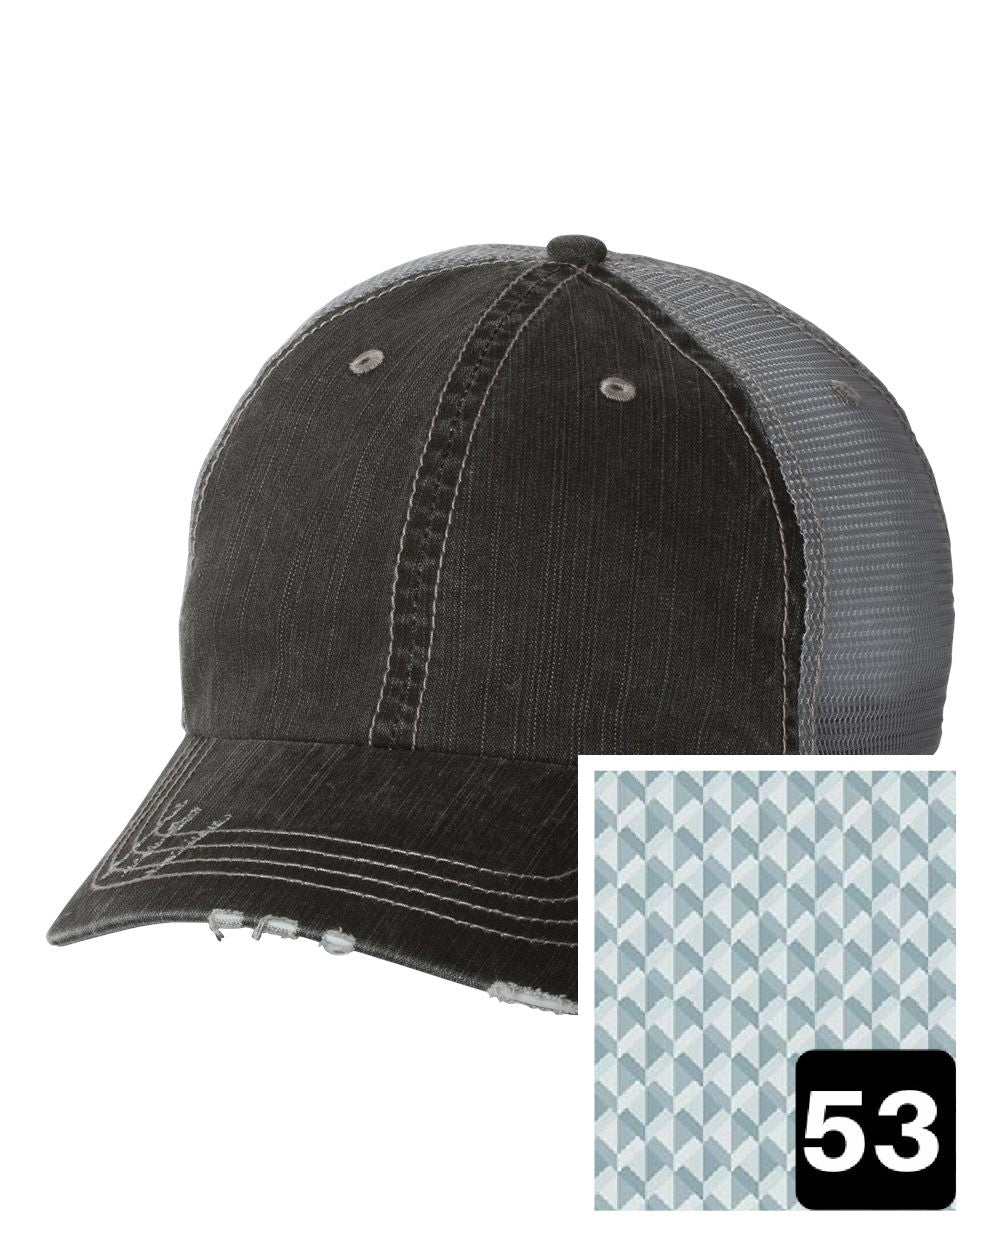 gray distressed trucker hat with multi-color stripe fabric state of Pennsylvania